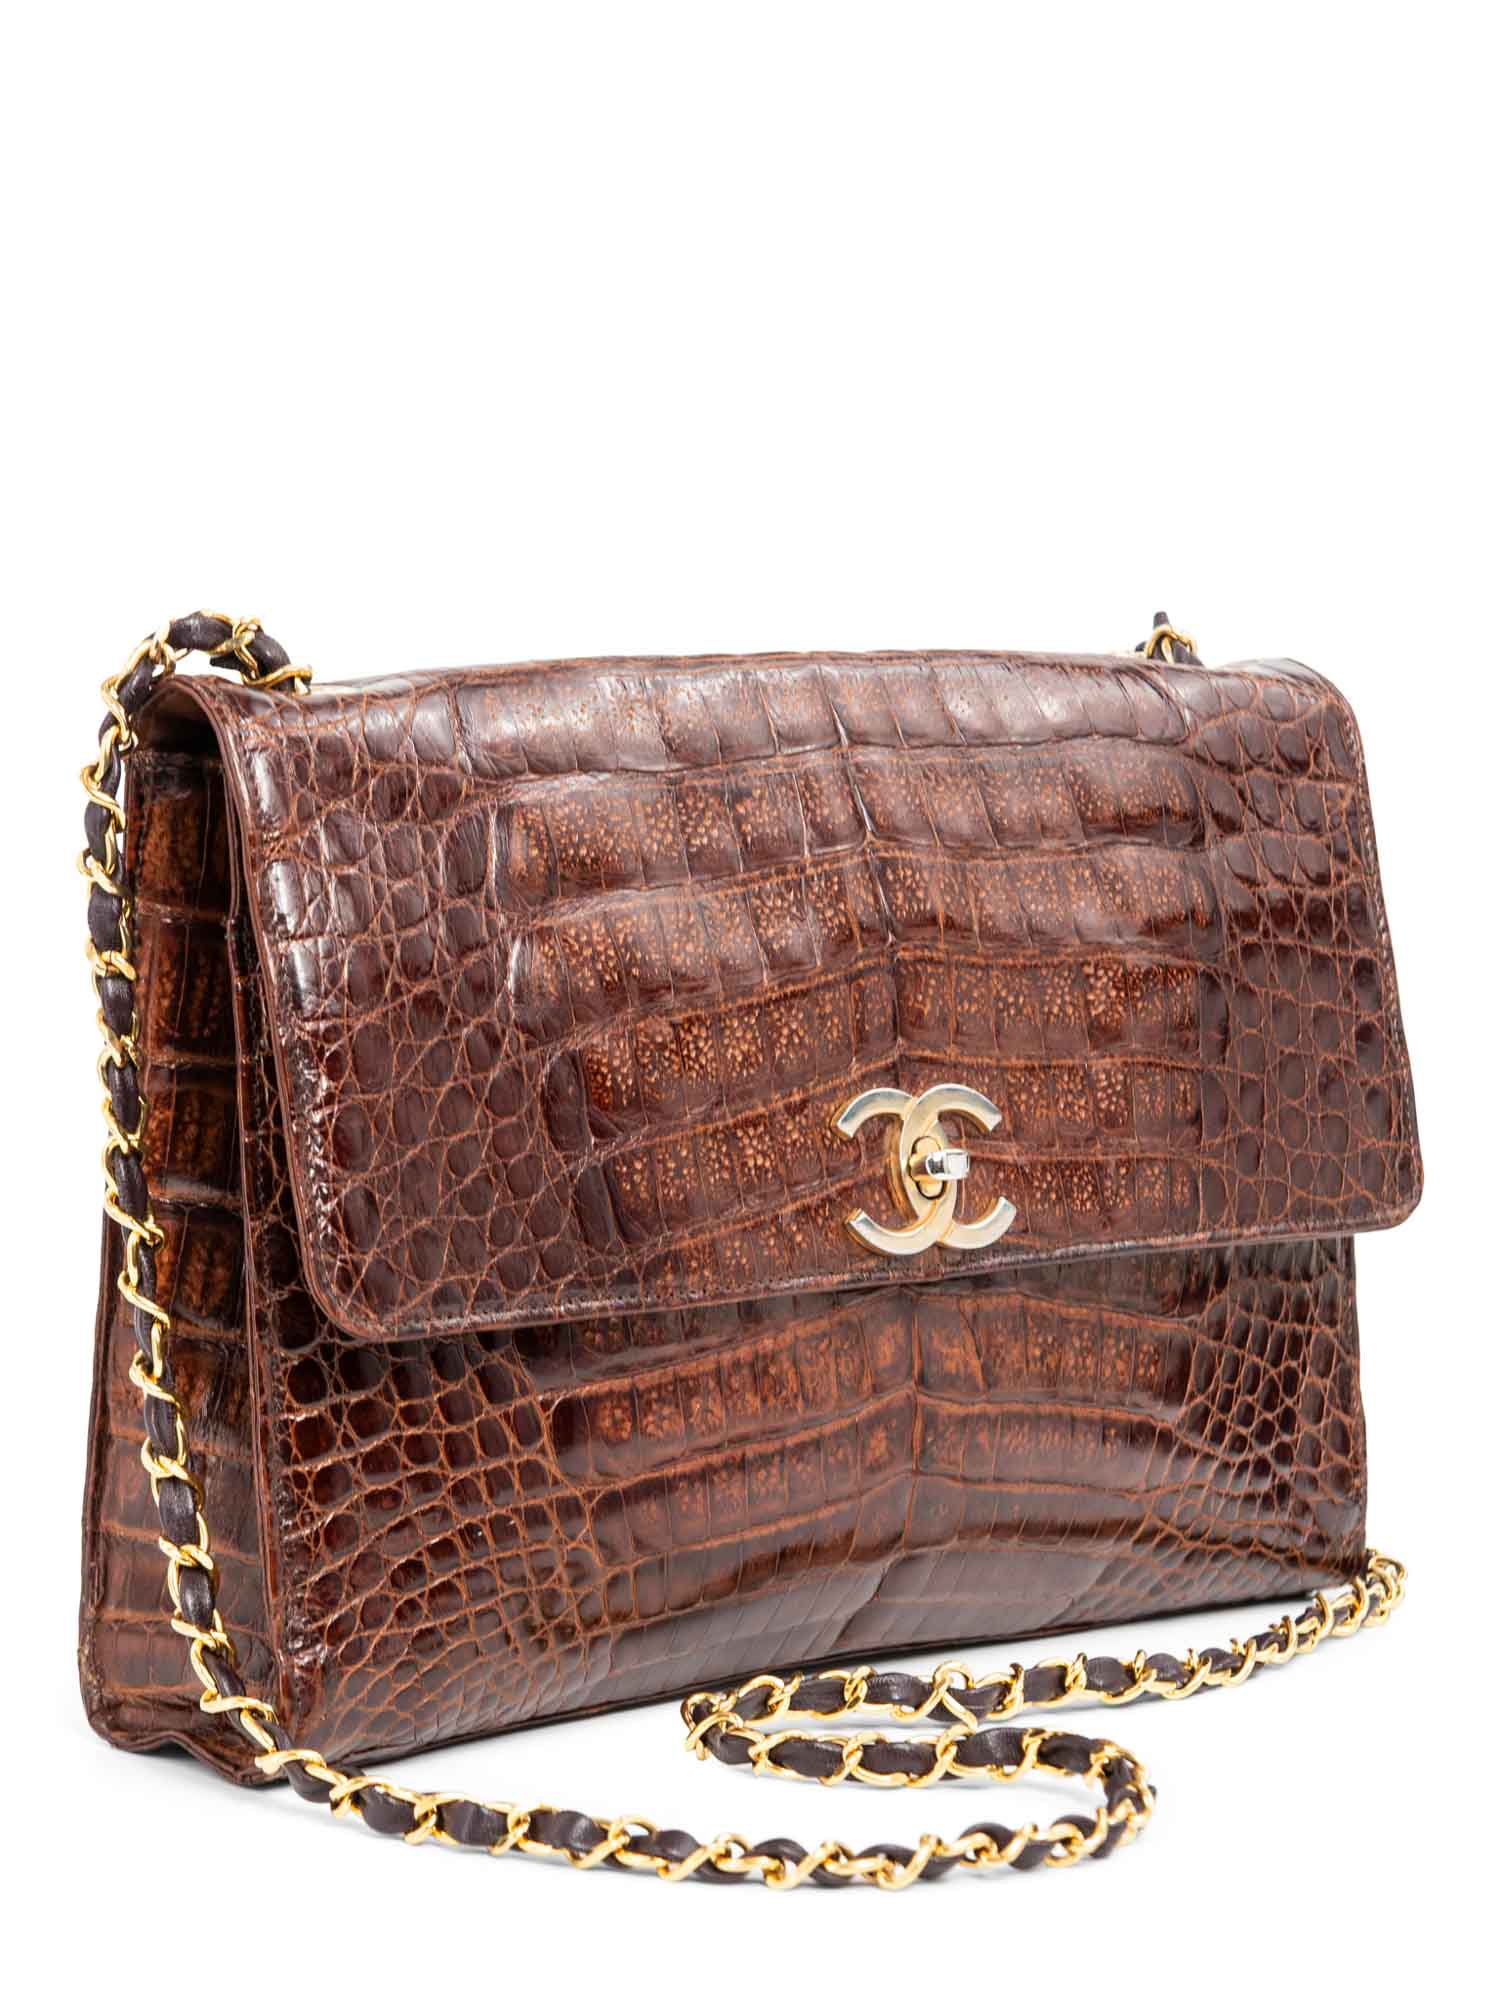 How Much Do Chanel Bags Cost? 5 Most Popular Chanel Bags